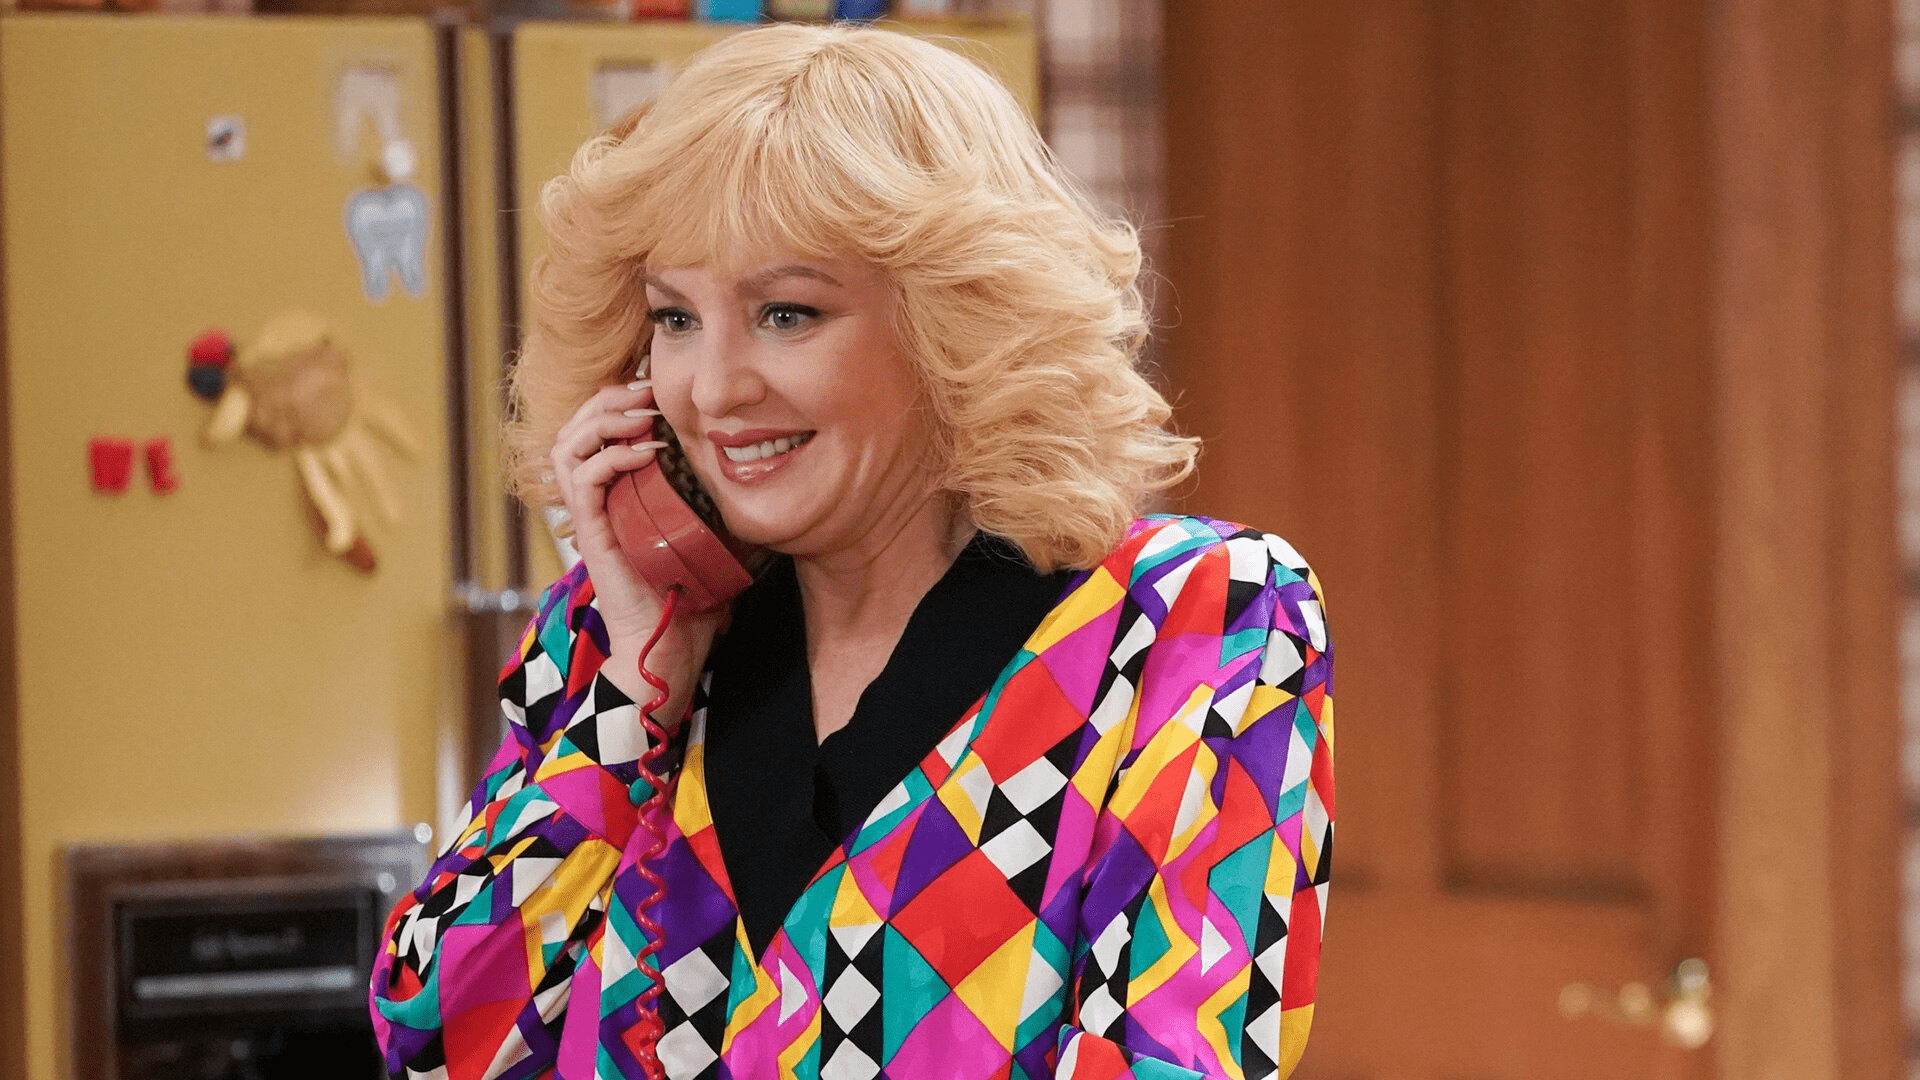 33 Facts About The Goldbergs Cast You Didn’t Know Before - The Goldbergs Cast Facts